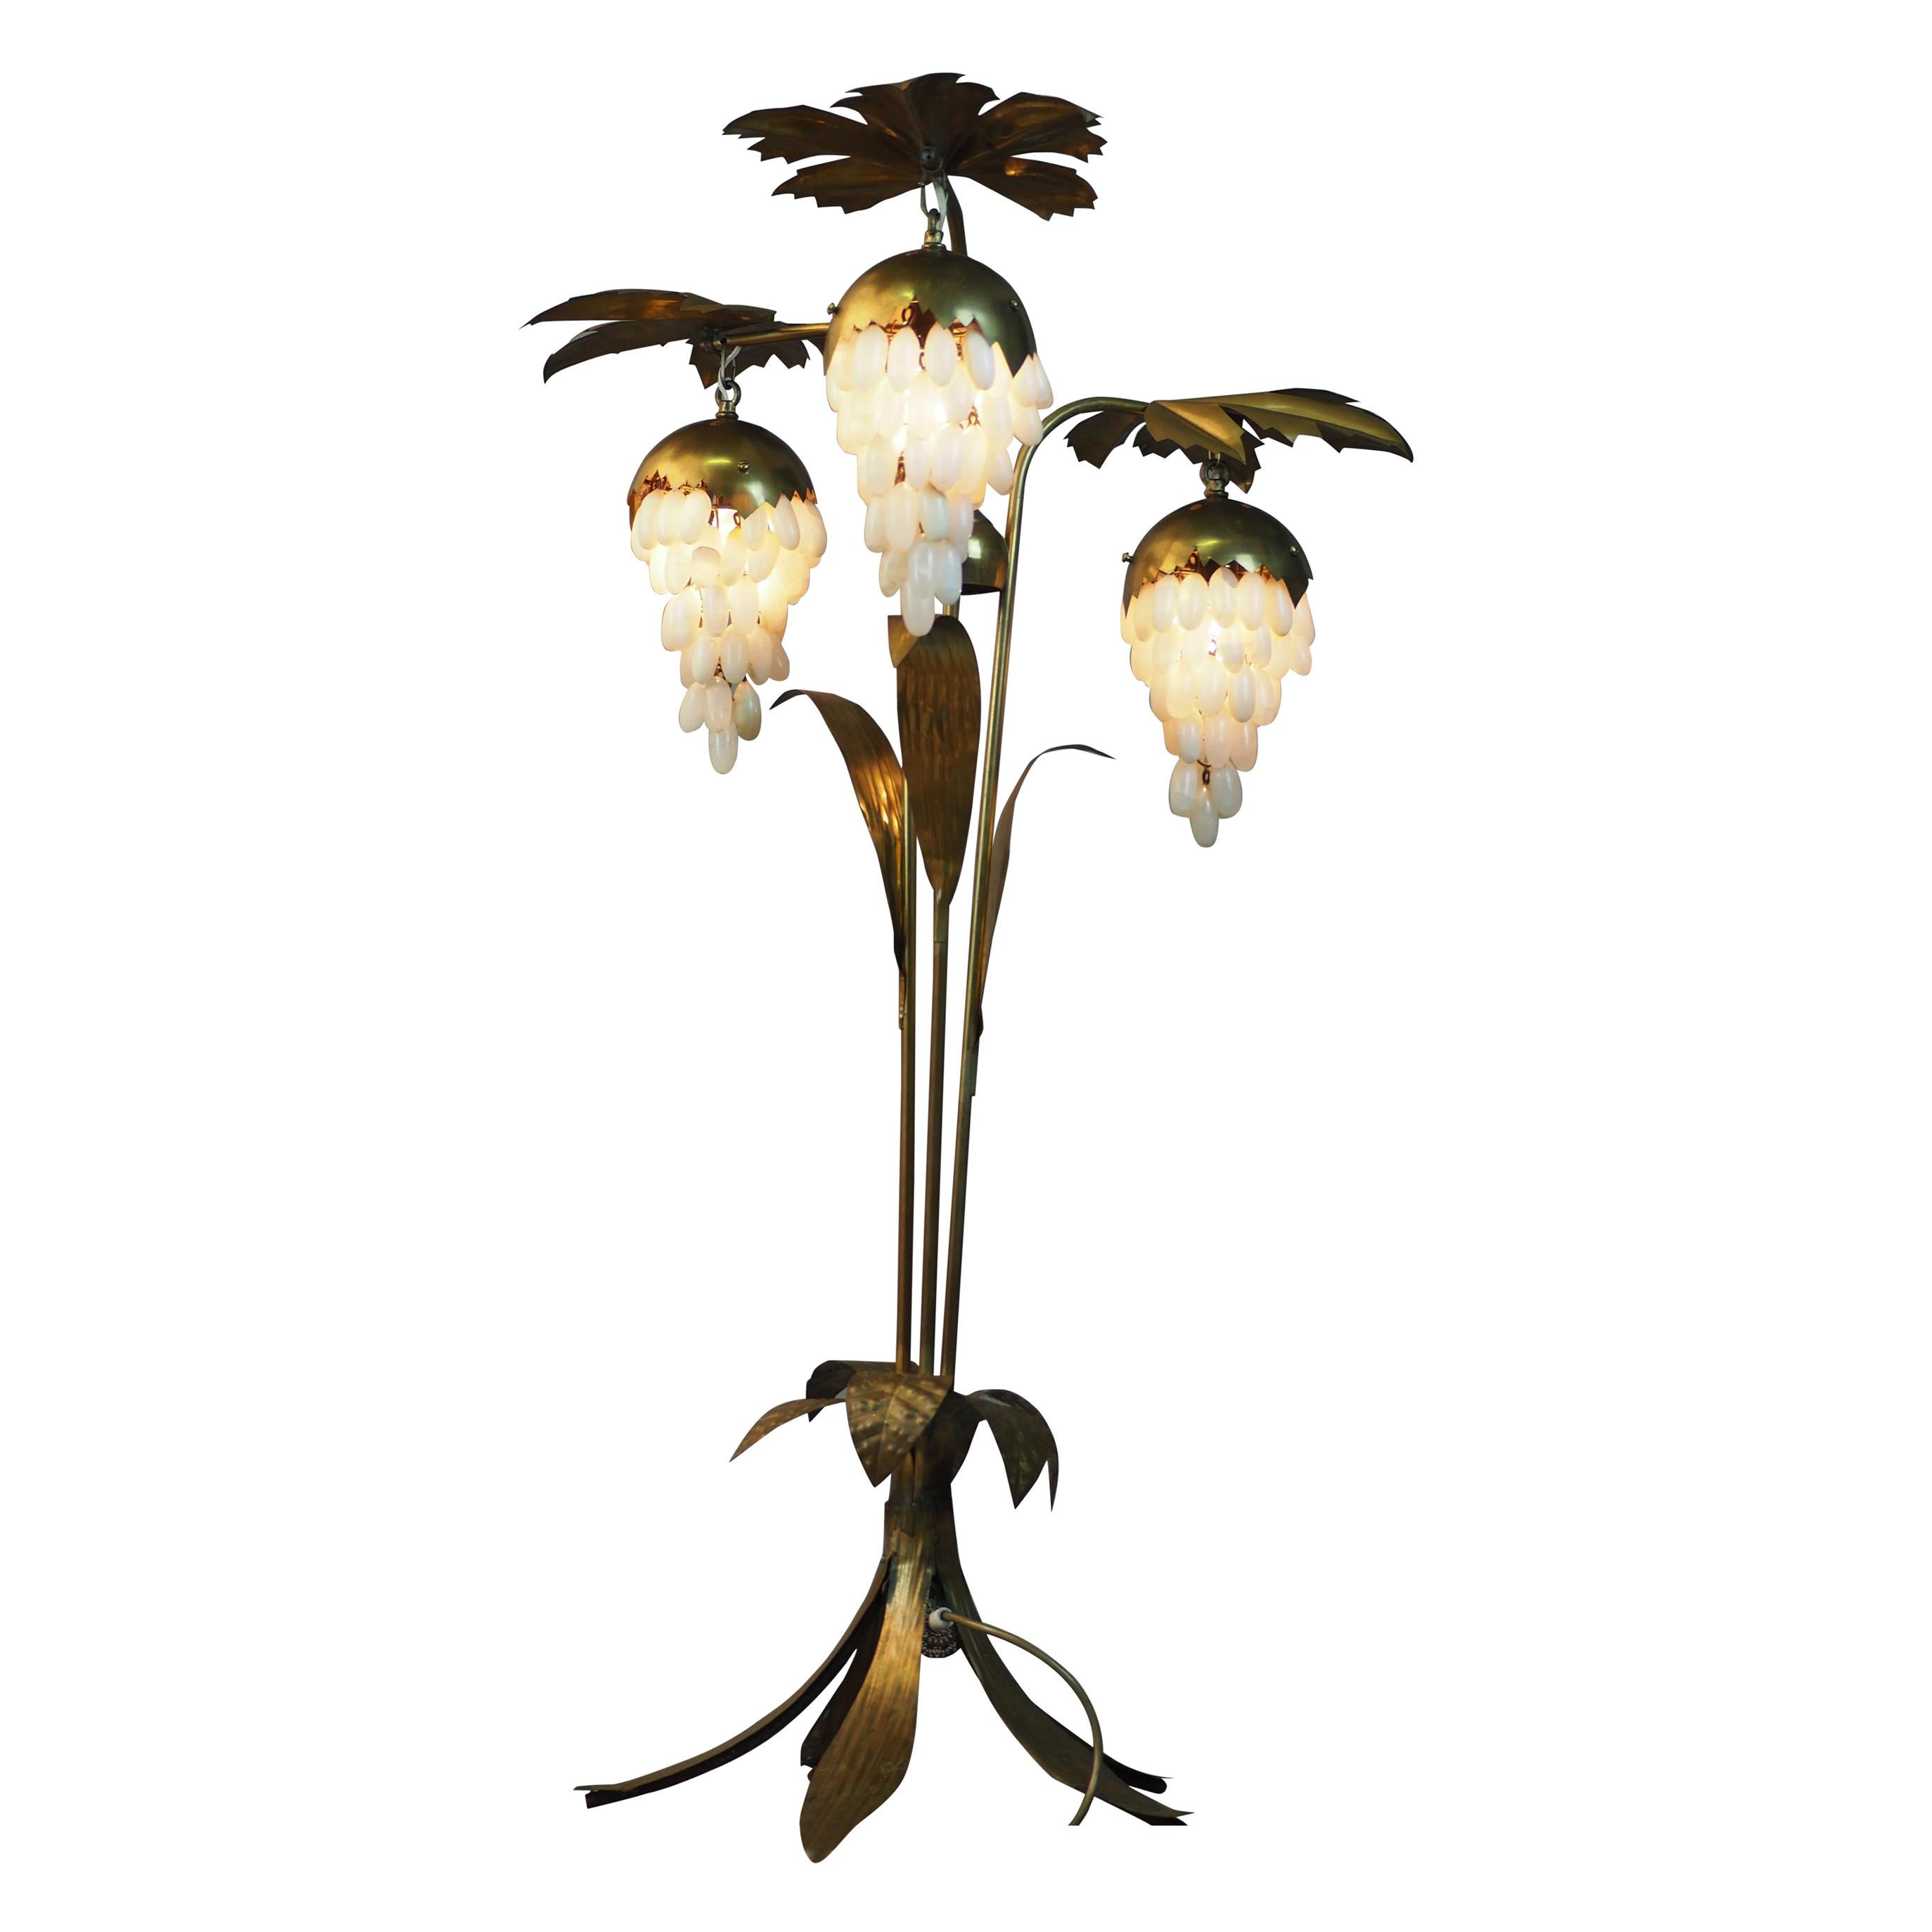 Mid-Century Brass Floor Lamp with Leafs and Alabaster Grapes, circa 1950s